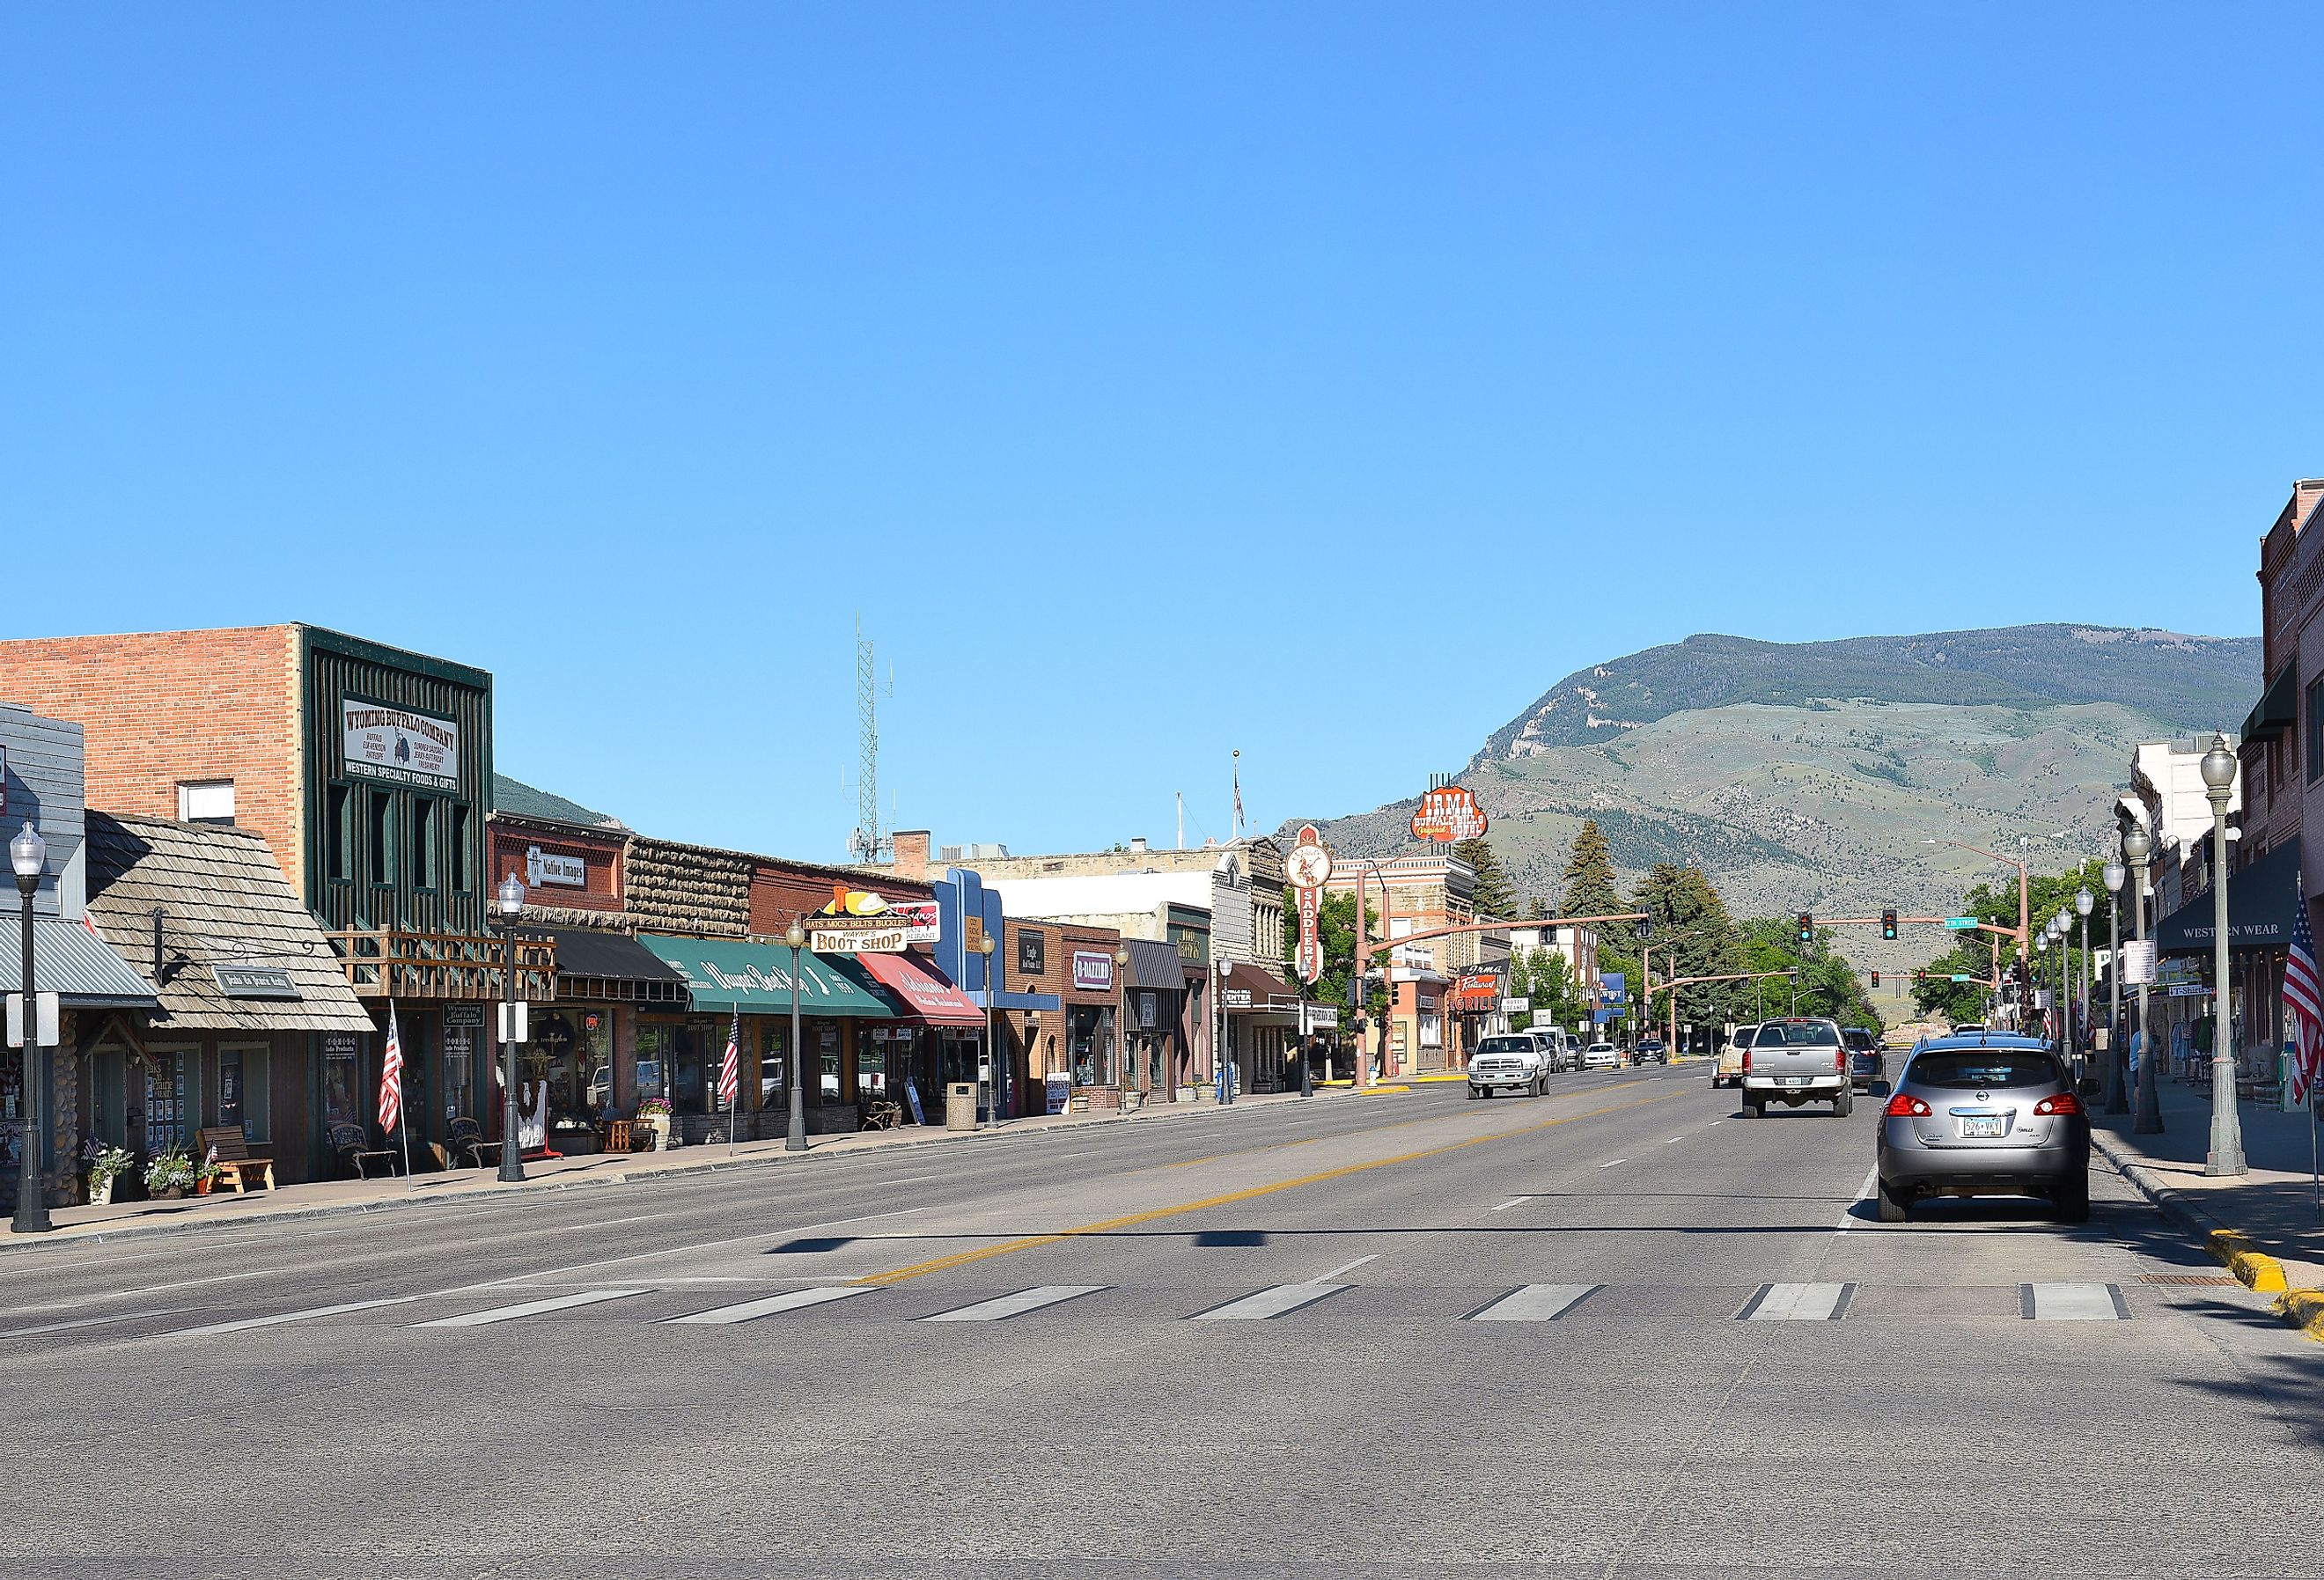 street view of town in wyoming